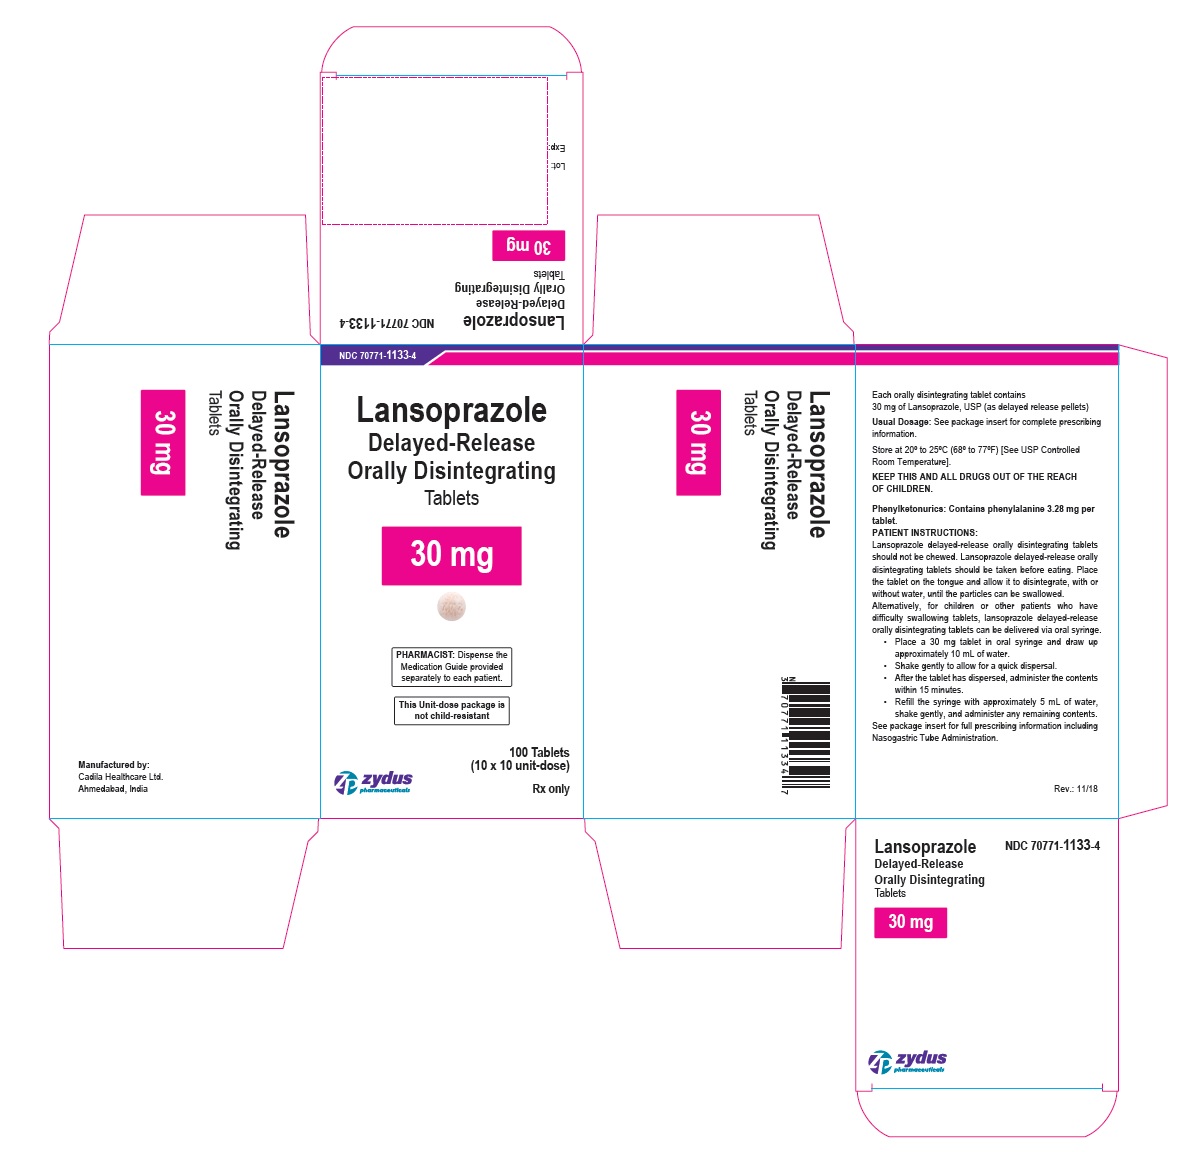 Lansoprazole delayed-release orally disintegrating tablets, 30 mg